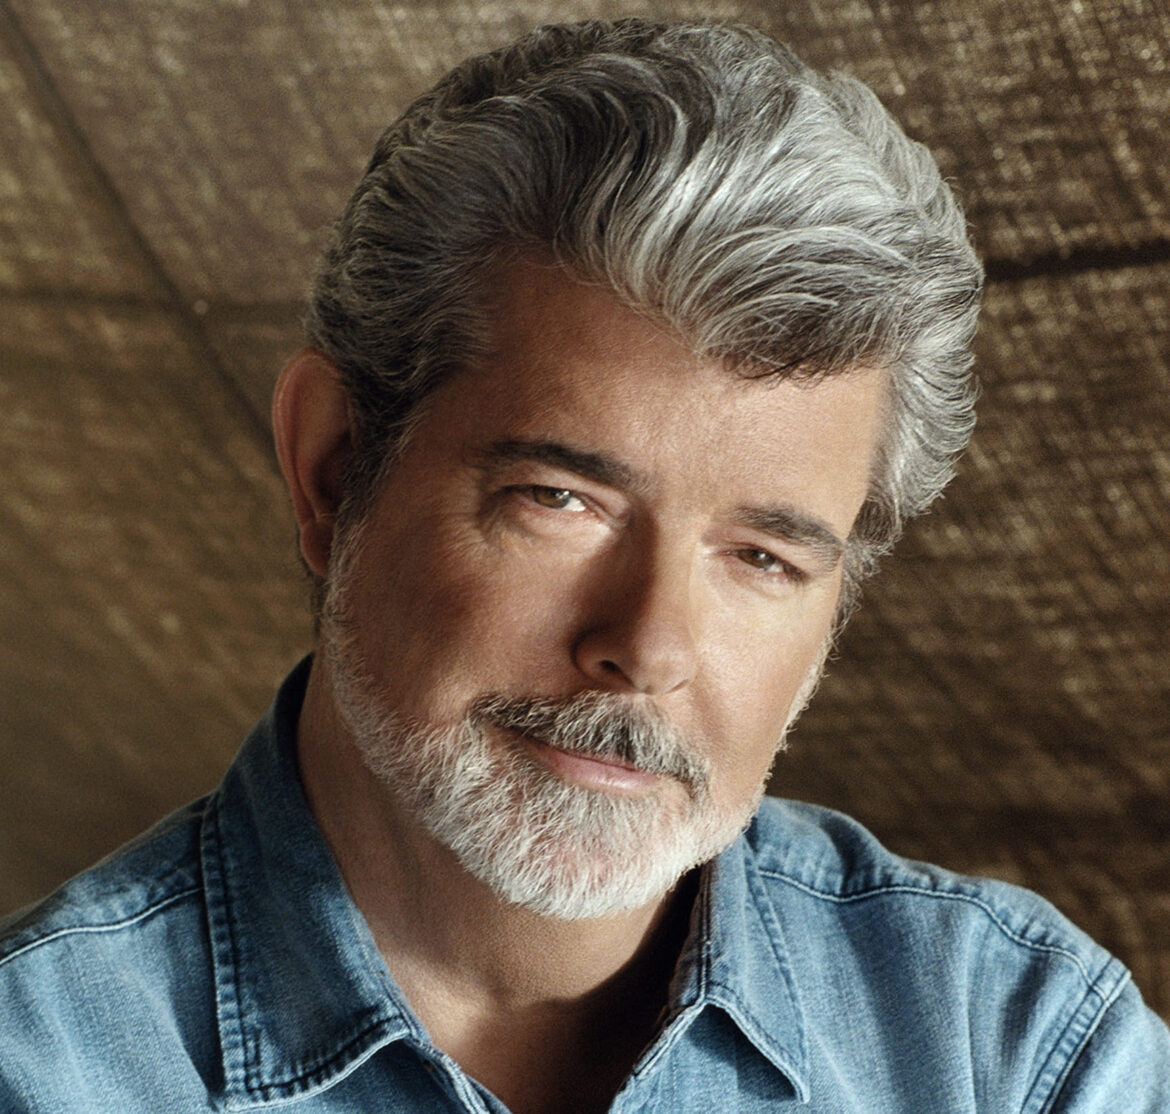 George Lucas © JAKS Productions. All rights reserved